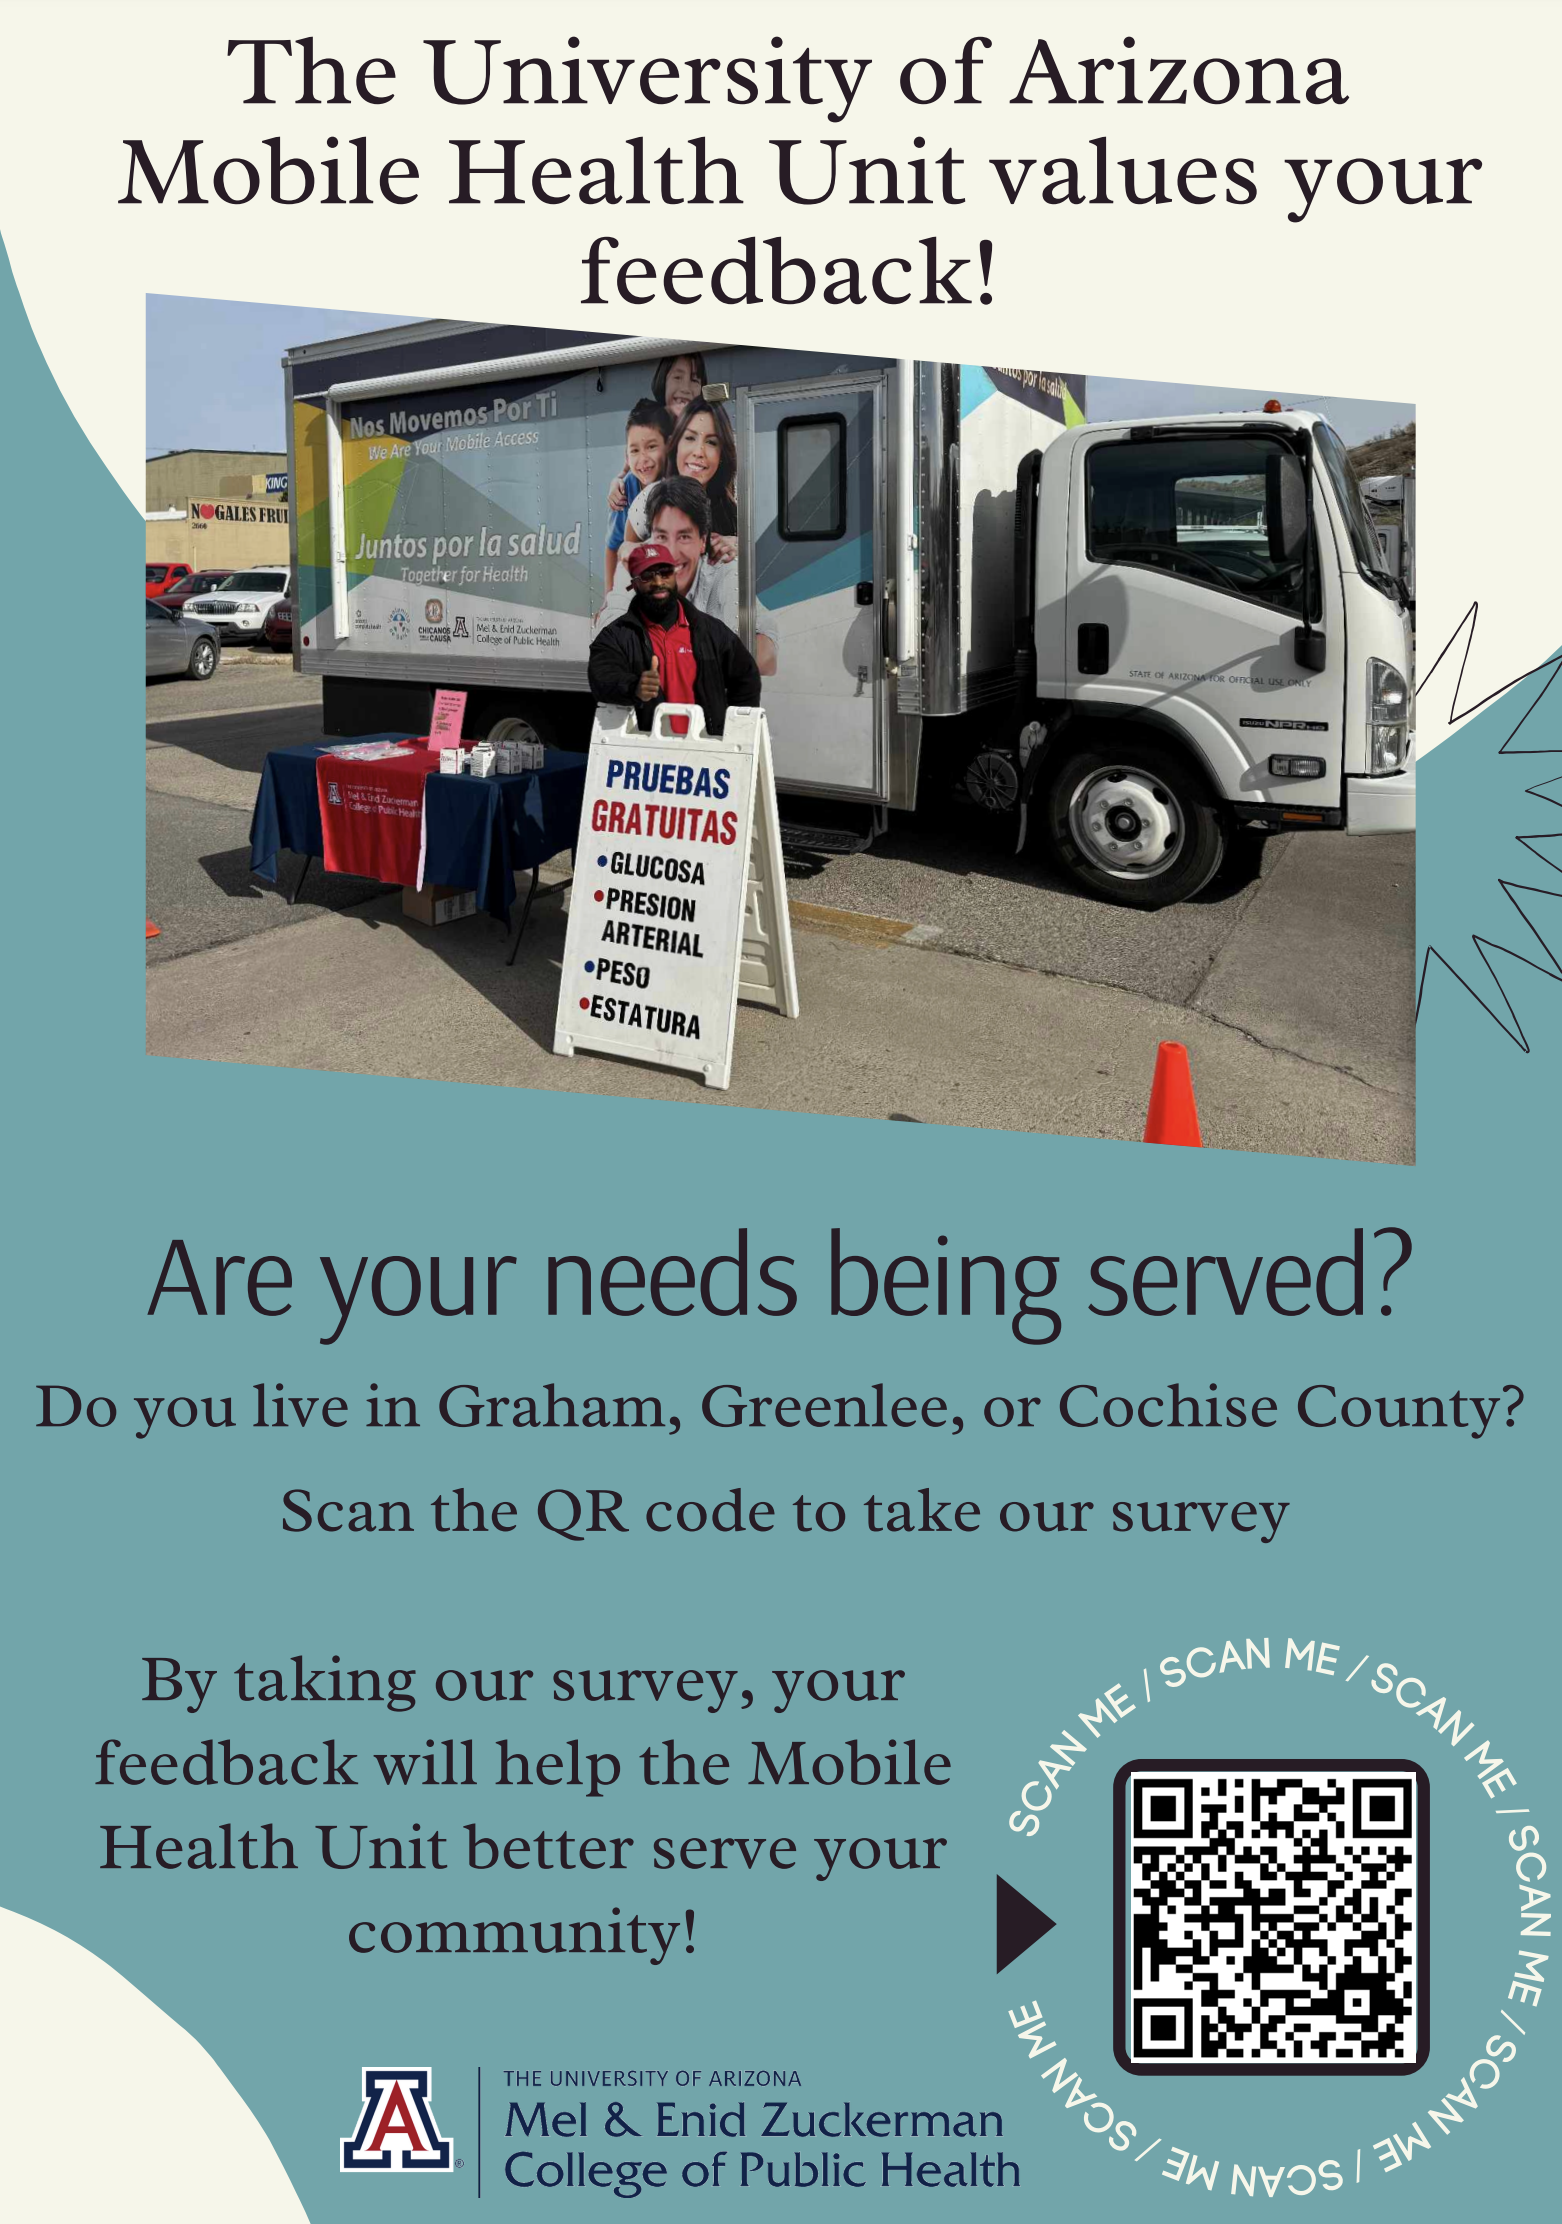 The University of Arizona’s Mobile Health Unit is looking for survey participants